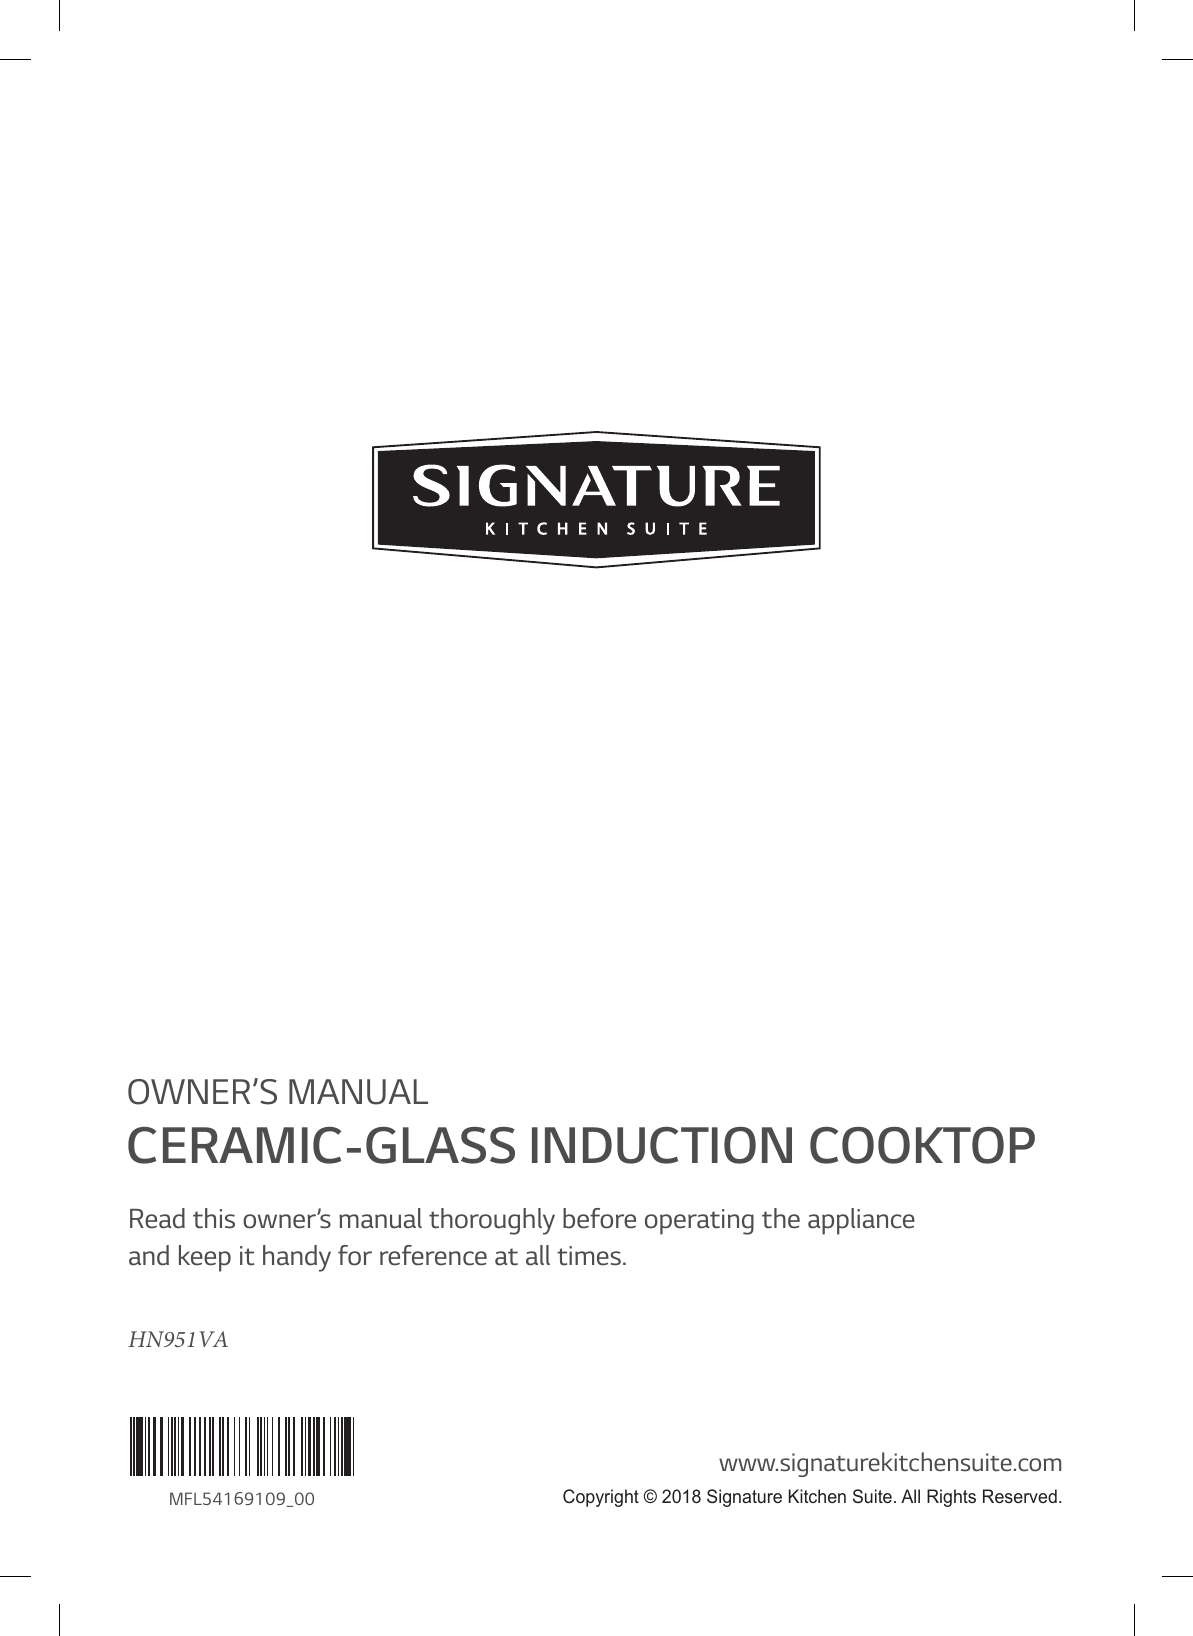 www.signaturekitchensuite.comMFL54169109_00OWNER’S MANUALCERAMIC-GLASS INDUCTION COOKTOPRead this owner’s manual thoroughly before operating the appliance and keep it handy for reference at all times.HN951VACopyright © 2018 Signature Kitchen Suite. All Rights Reserved.